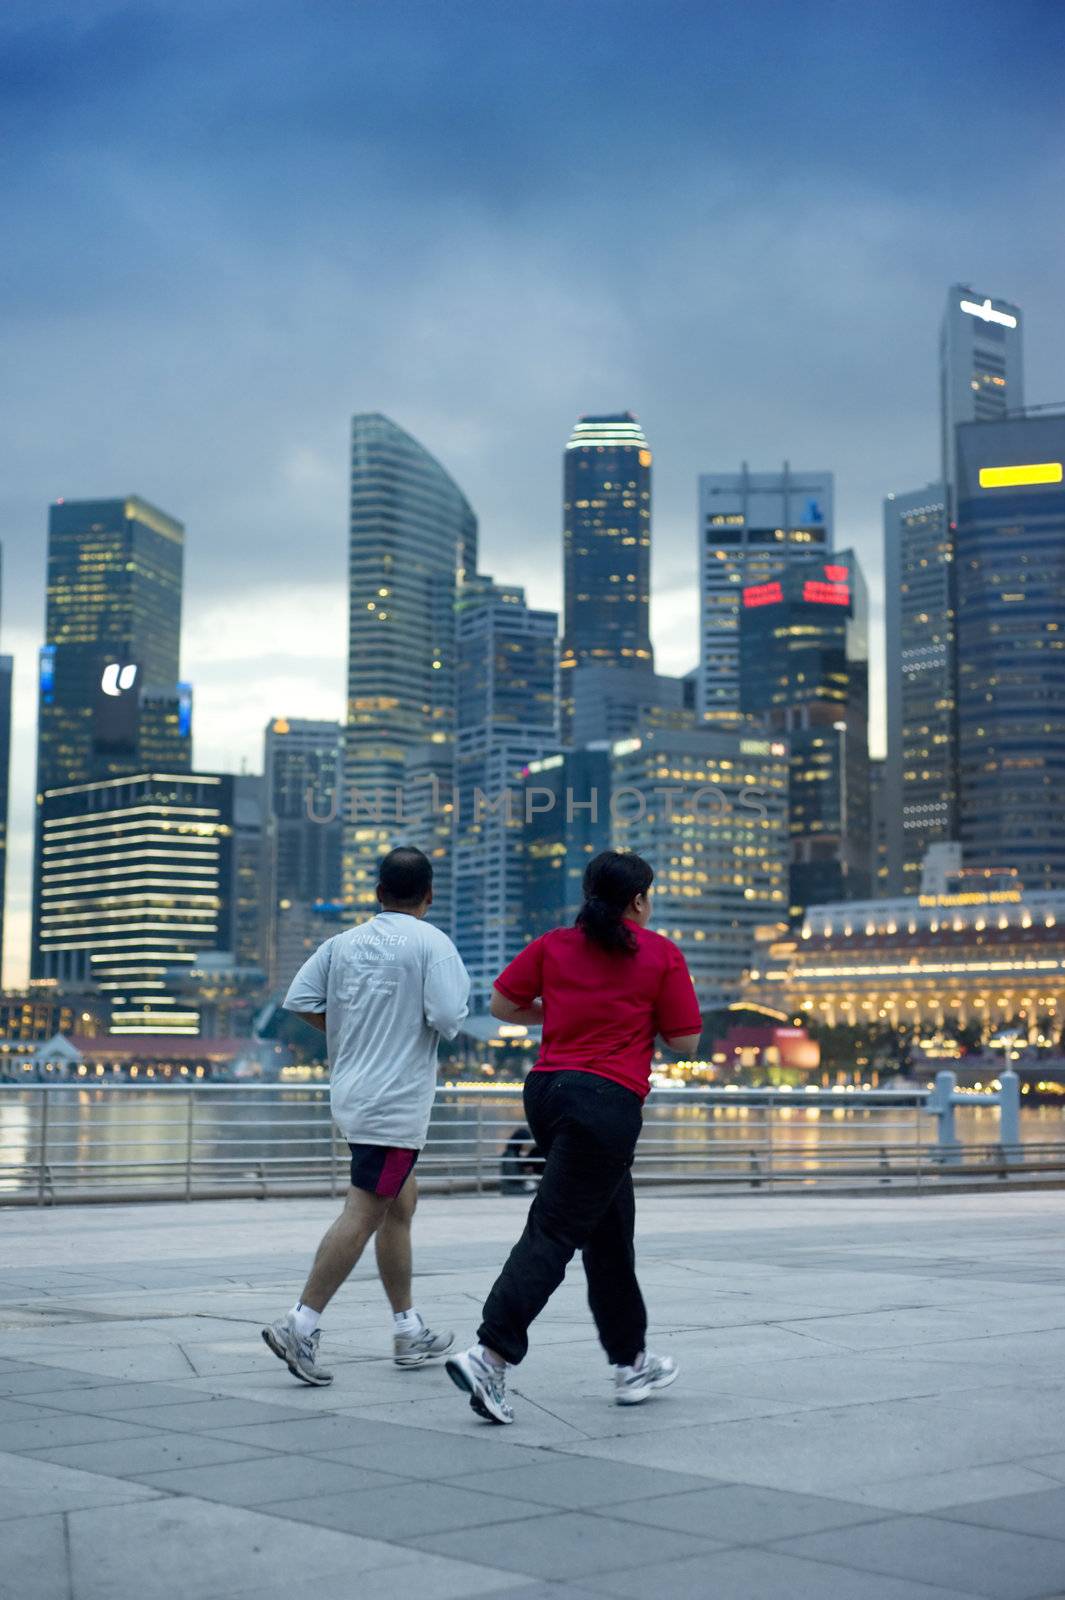 Singapore, Republic of Singapore - May 3, 2011: People running in the evening on embankment in front of business center. Running is very popular sports in Singapore